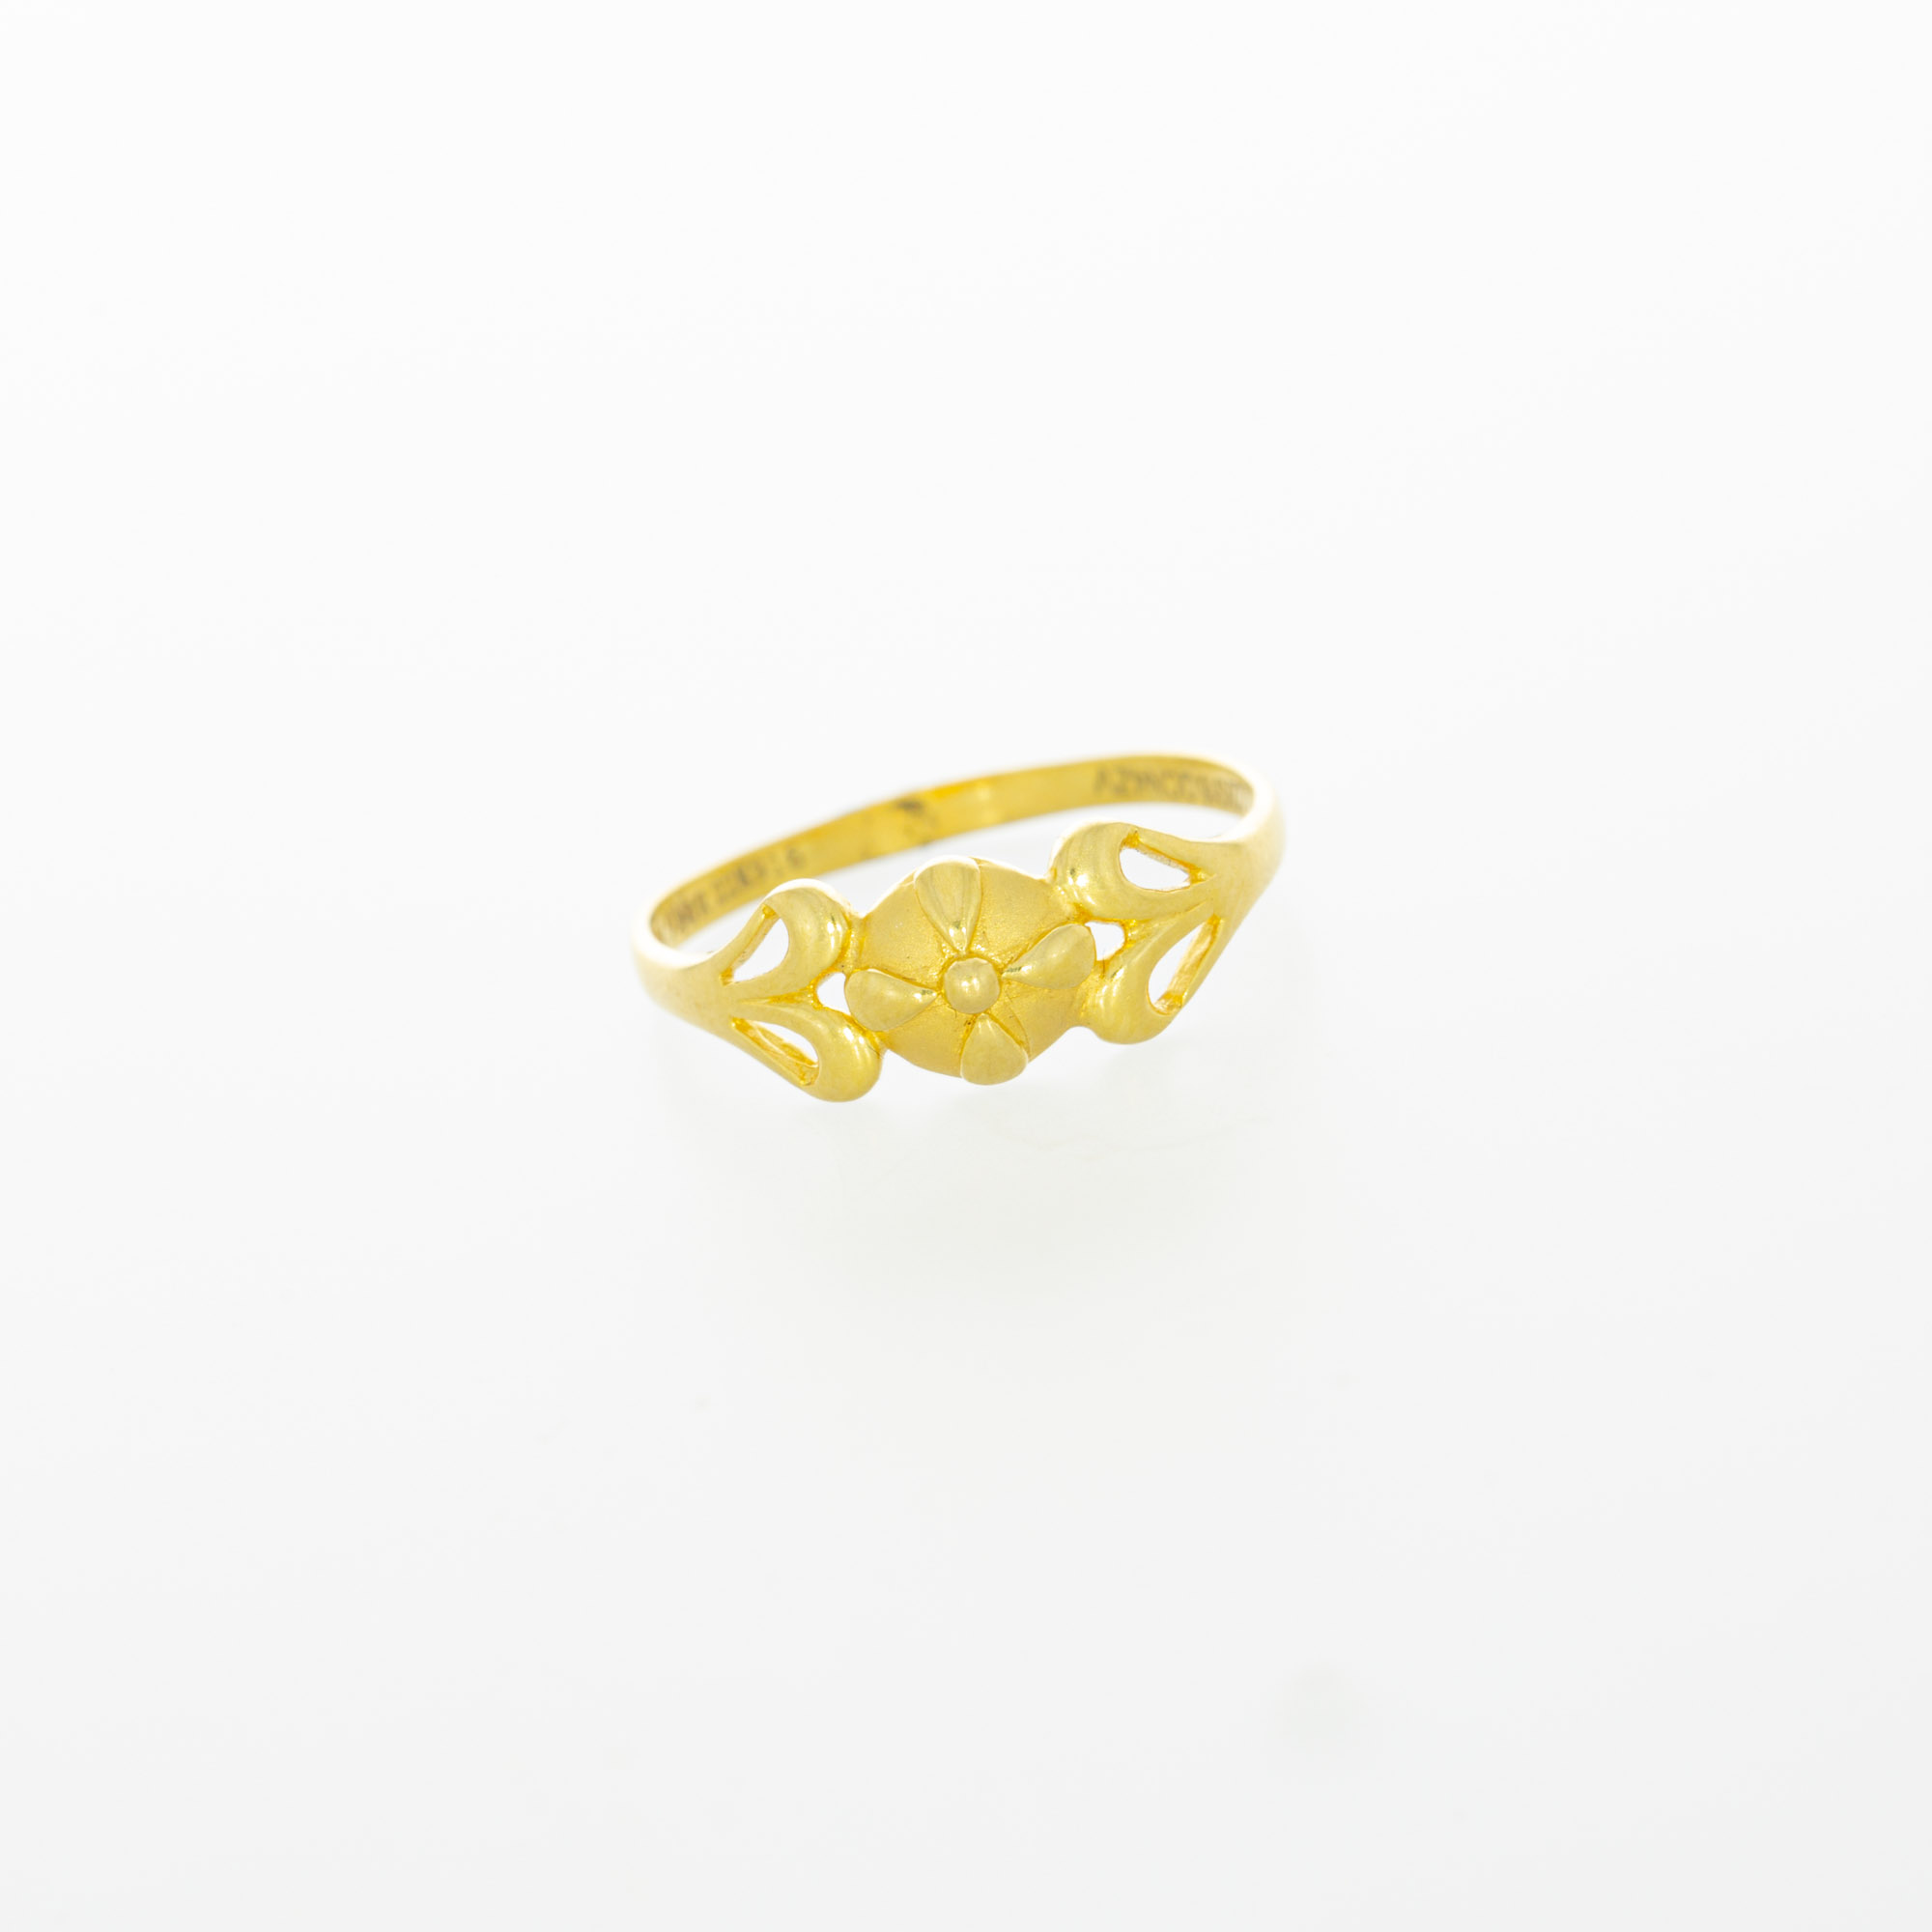 Stunning Coral Flower Gold Ring